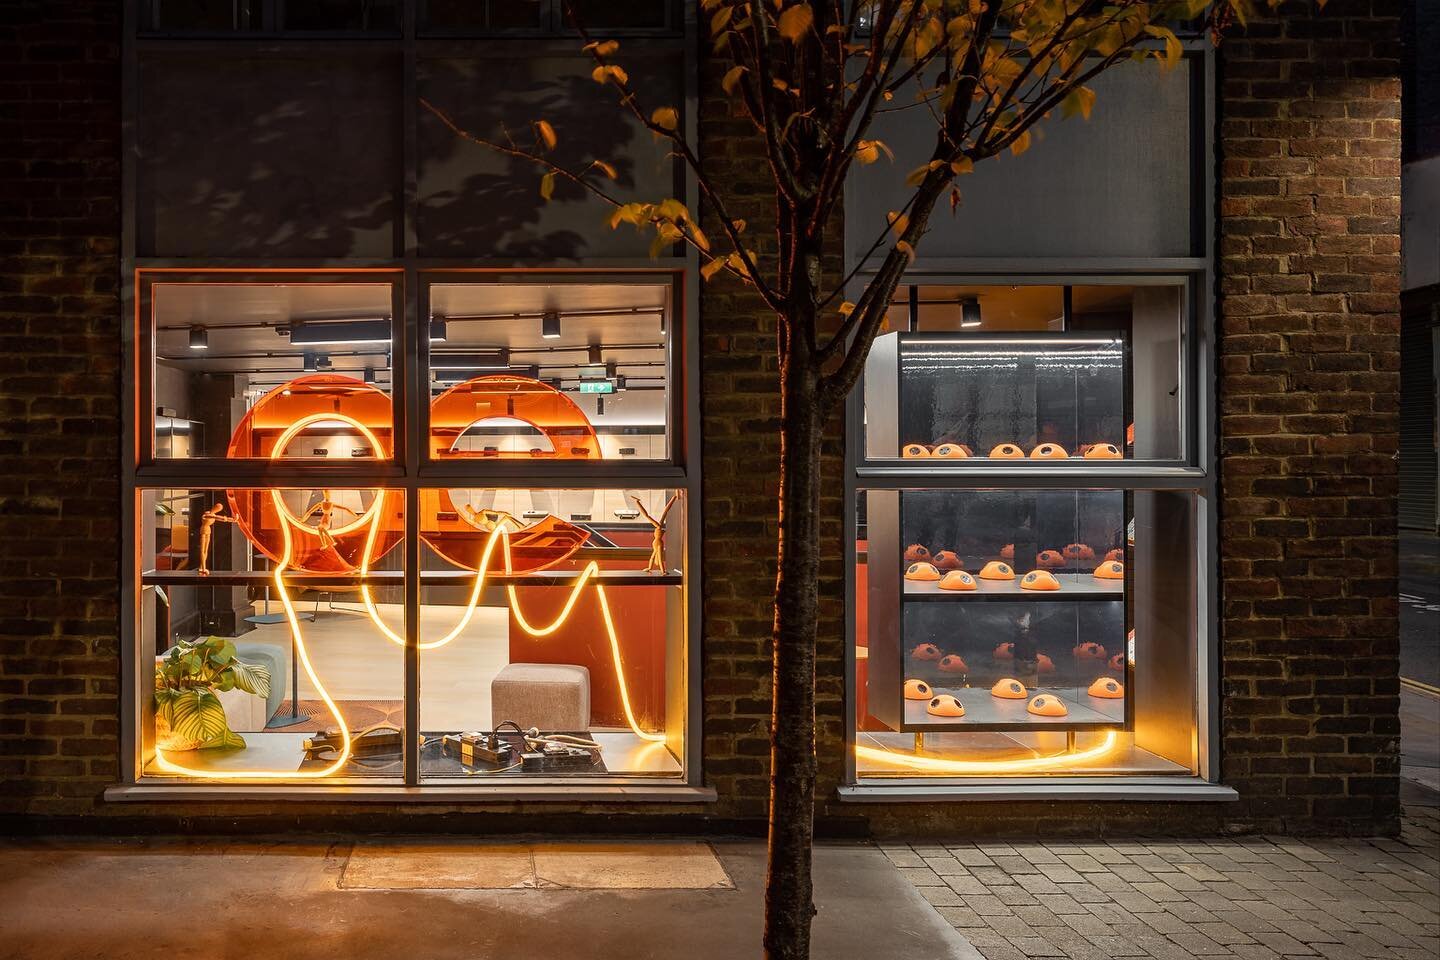 Our recent project OE Electrics showroom was a fun and unique project to work on. We worked closely with @3equals1design to design a flexible lighting design for the showroom in the heart of Clerkenwell. 

Lighting design @susanlakelight 
Interior de